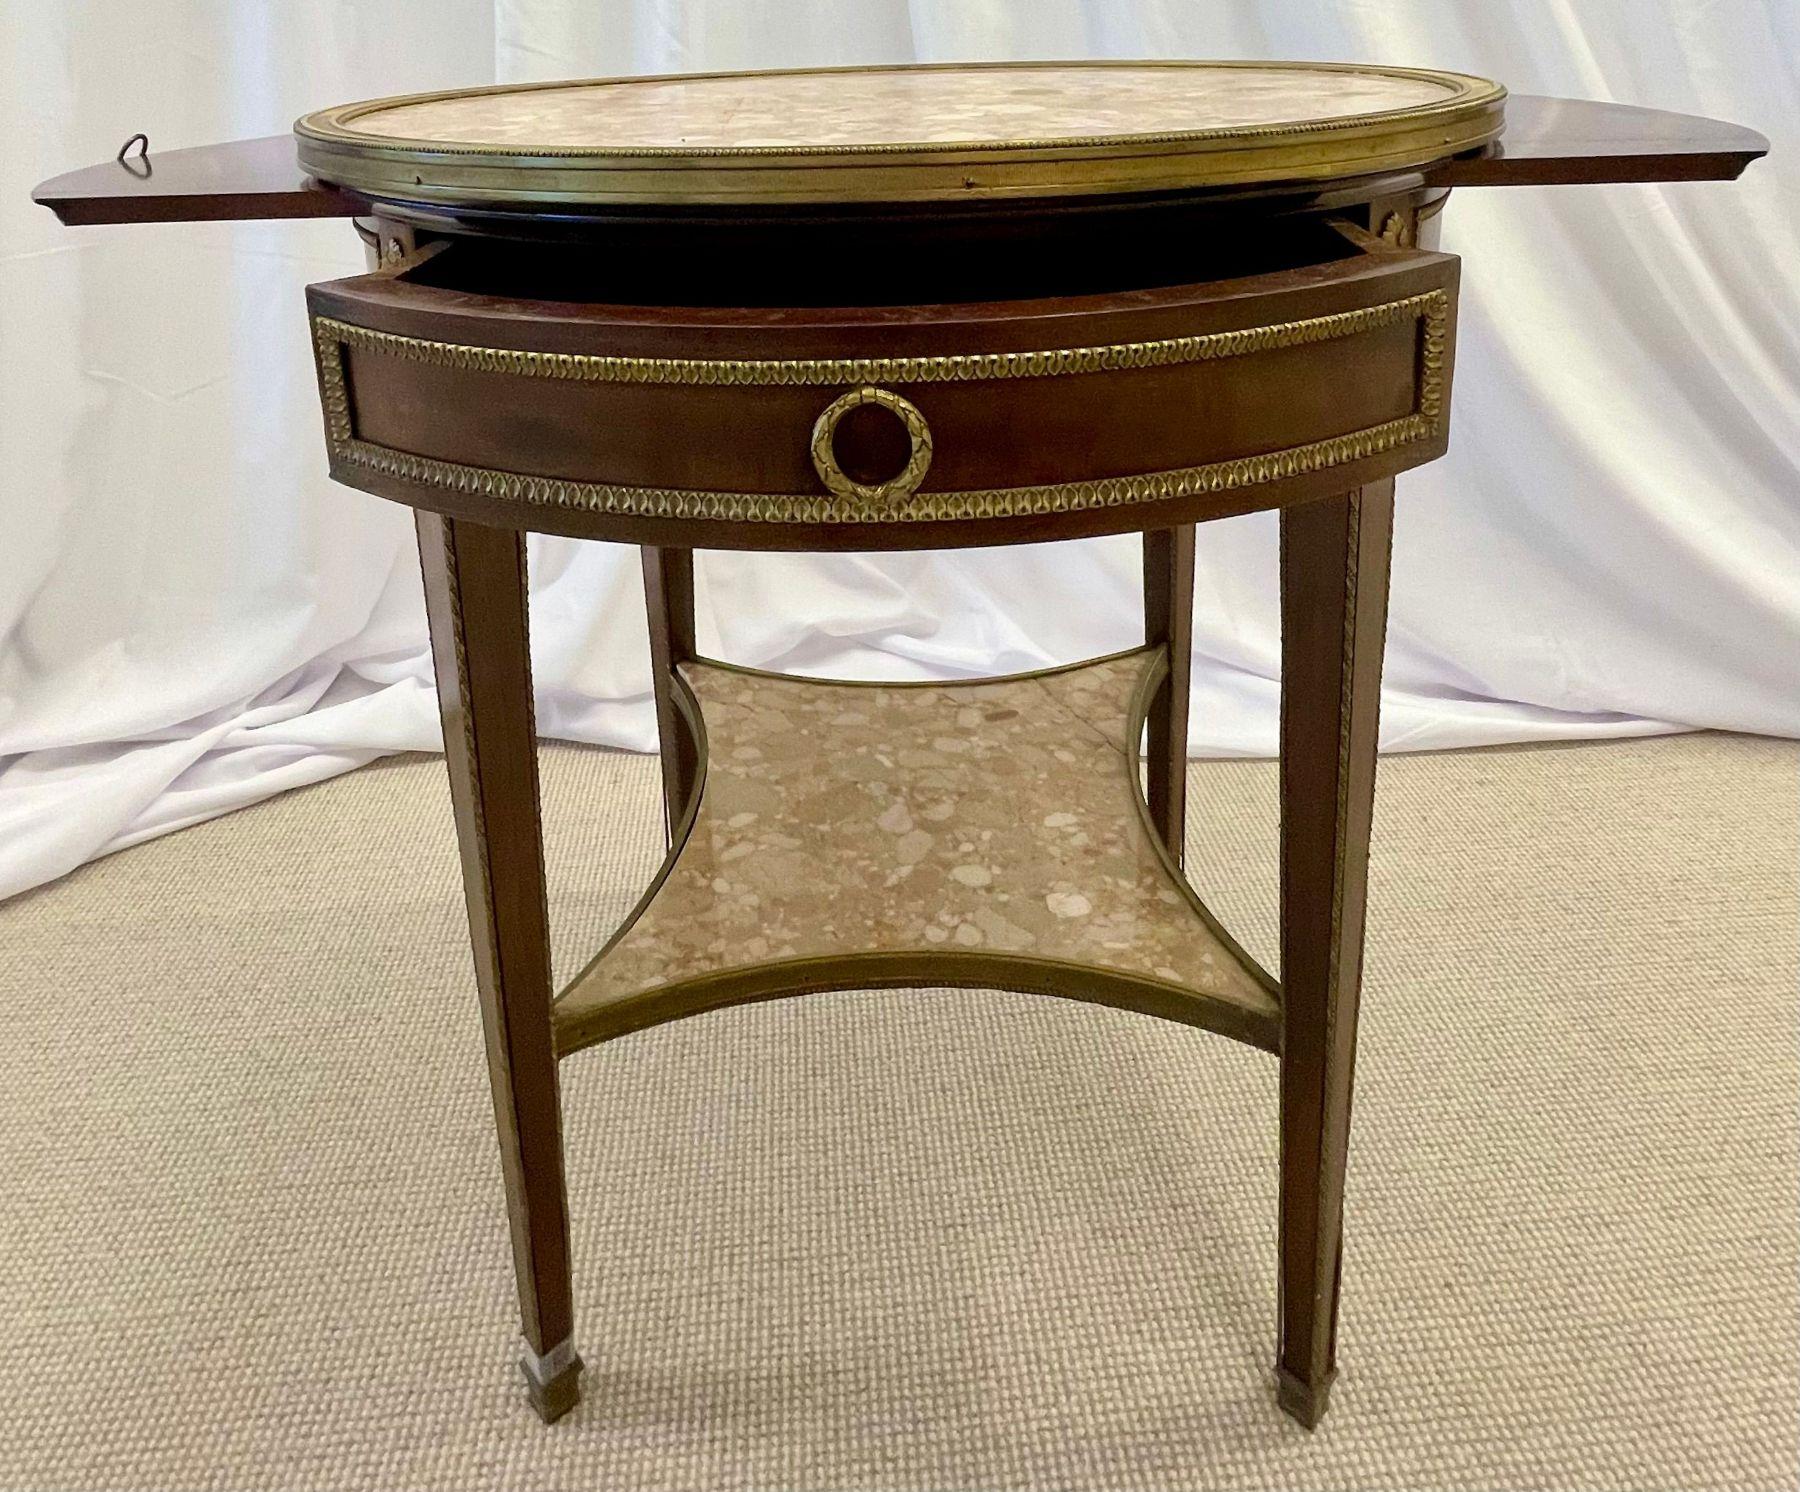 French Mahogany Louis XVI Style Marble Top Bouillotte Table, Bronze Mounted. A stunning example of the finest of bouillottes. This François Linke style end or side table sports the finest of bronze castings with a lower marble shelf used as an